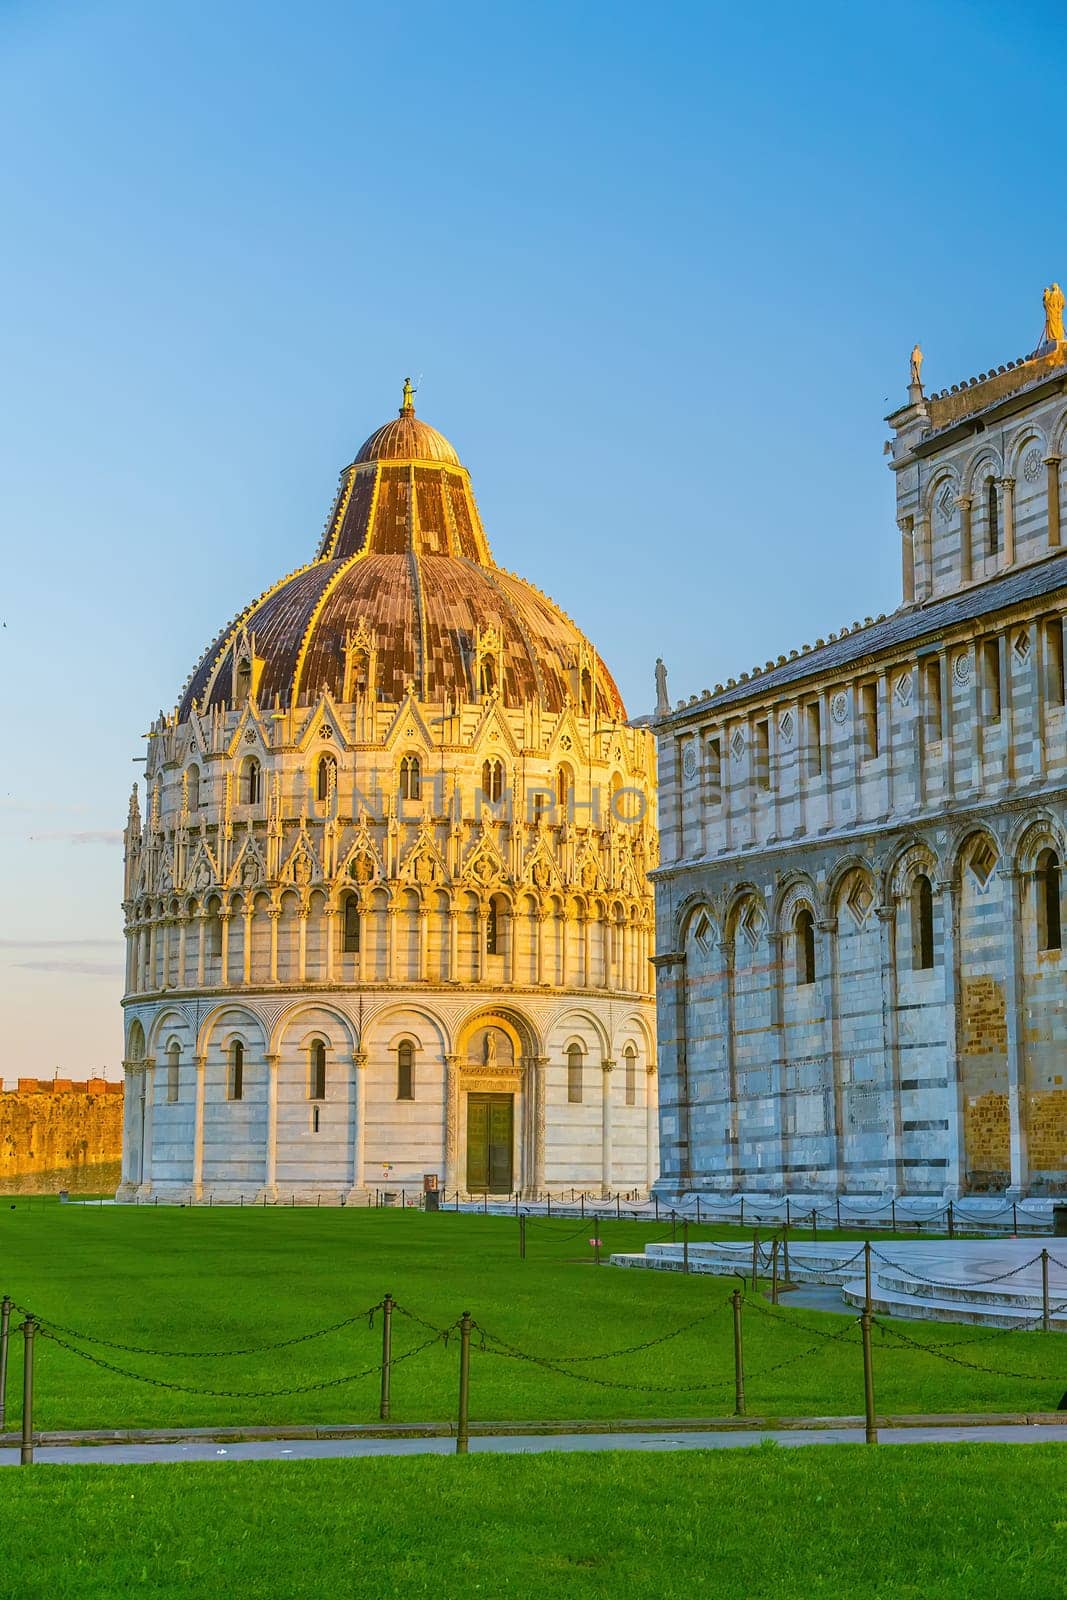 Pisa Cathedral and the Leaning Tower in Pisa, Italy